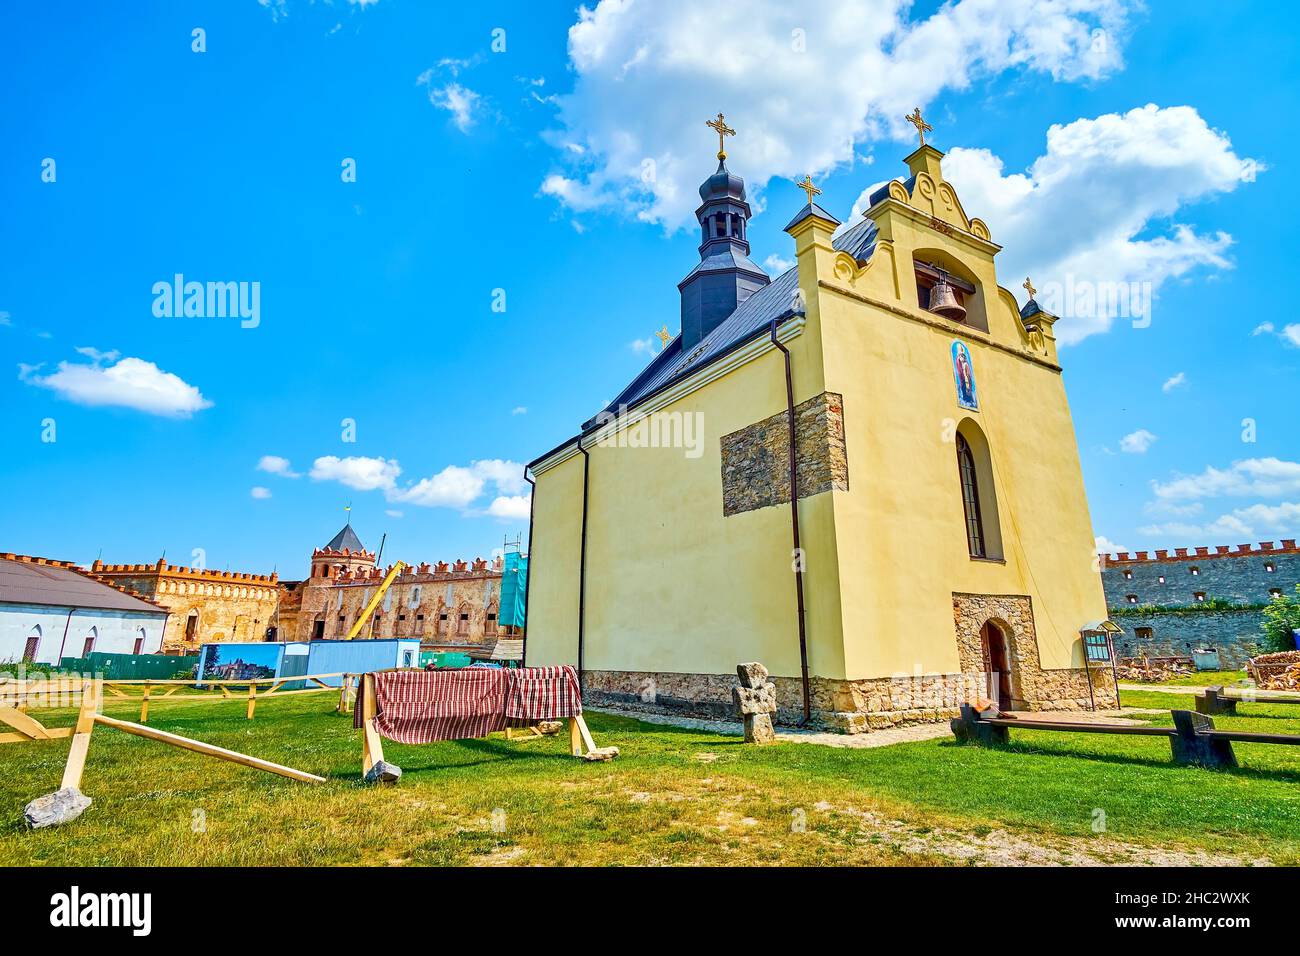 The modest facade of Castle Church of st Nicholas, located in inner courtyard of Medzhybizh fortress, Ukraine Stock Photo